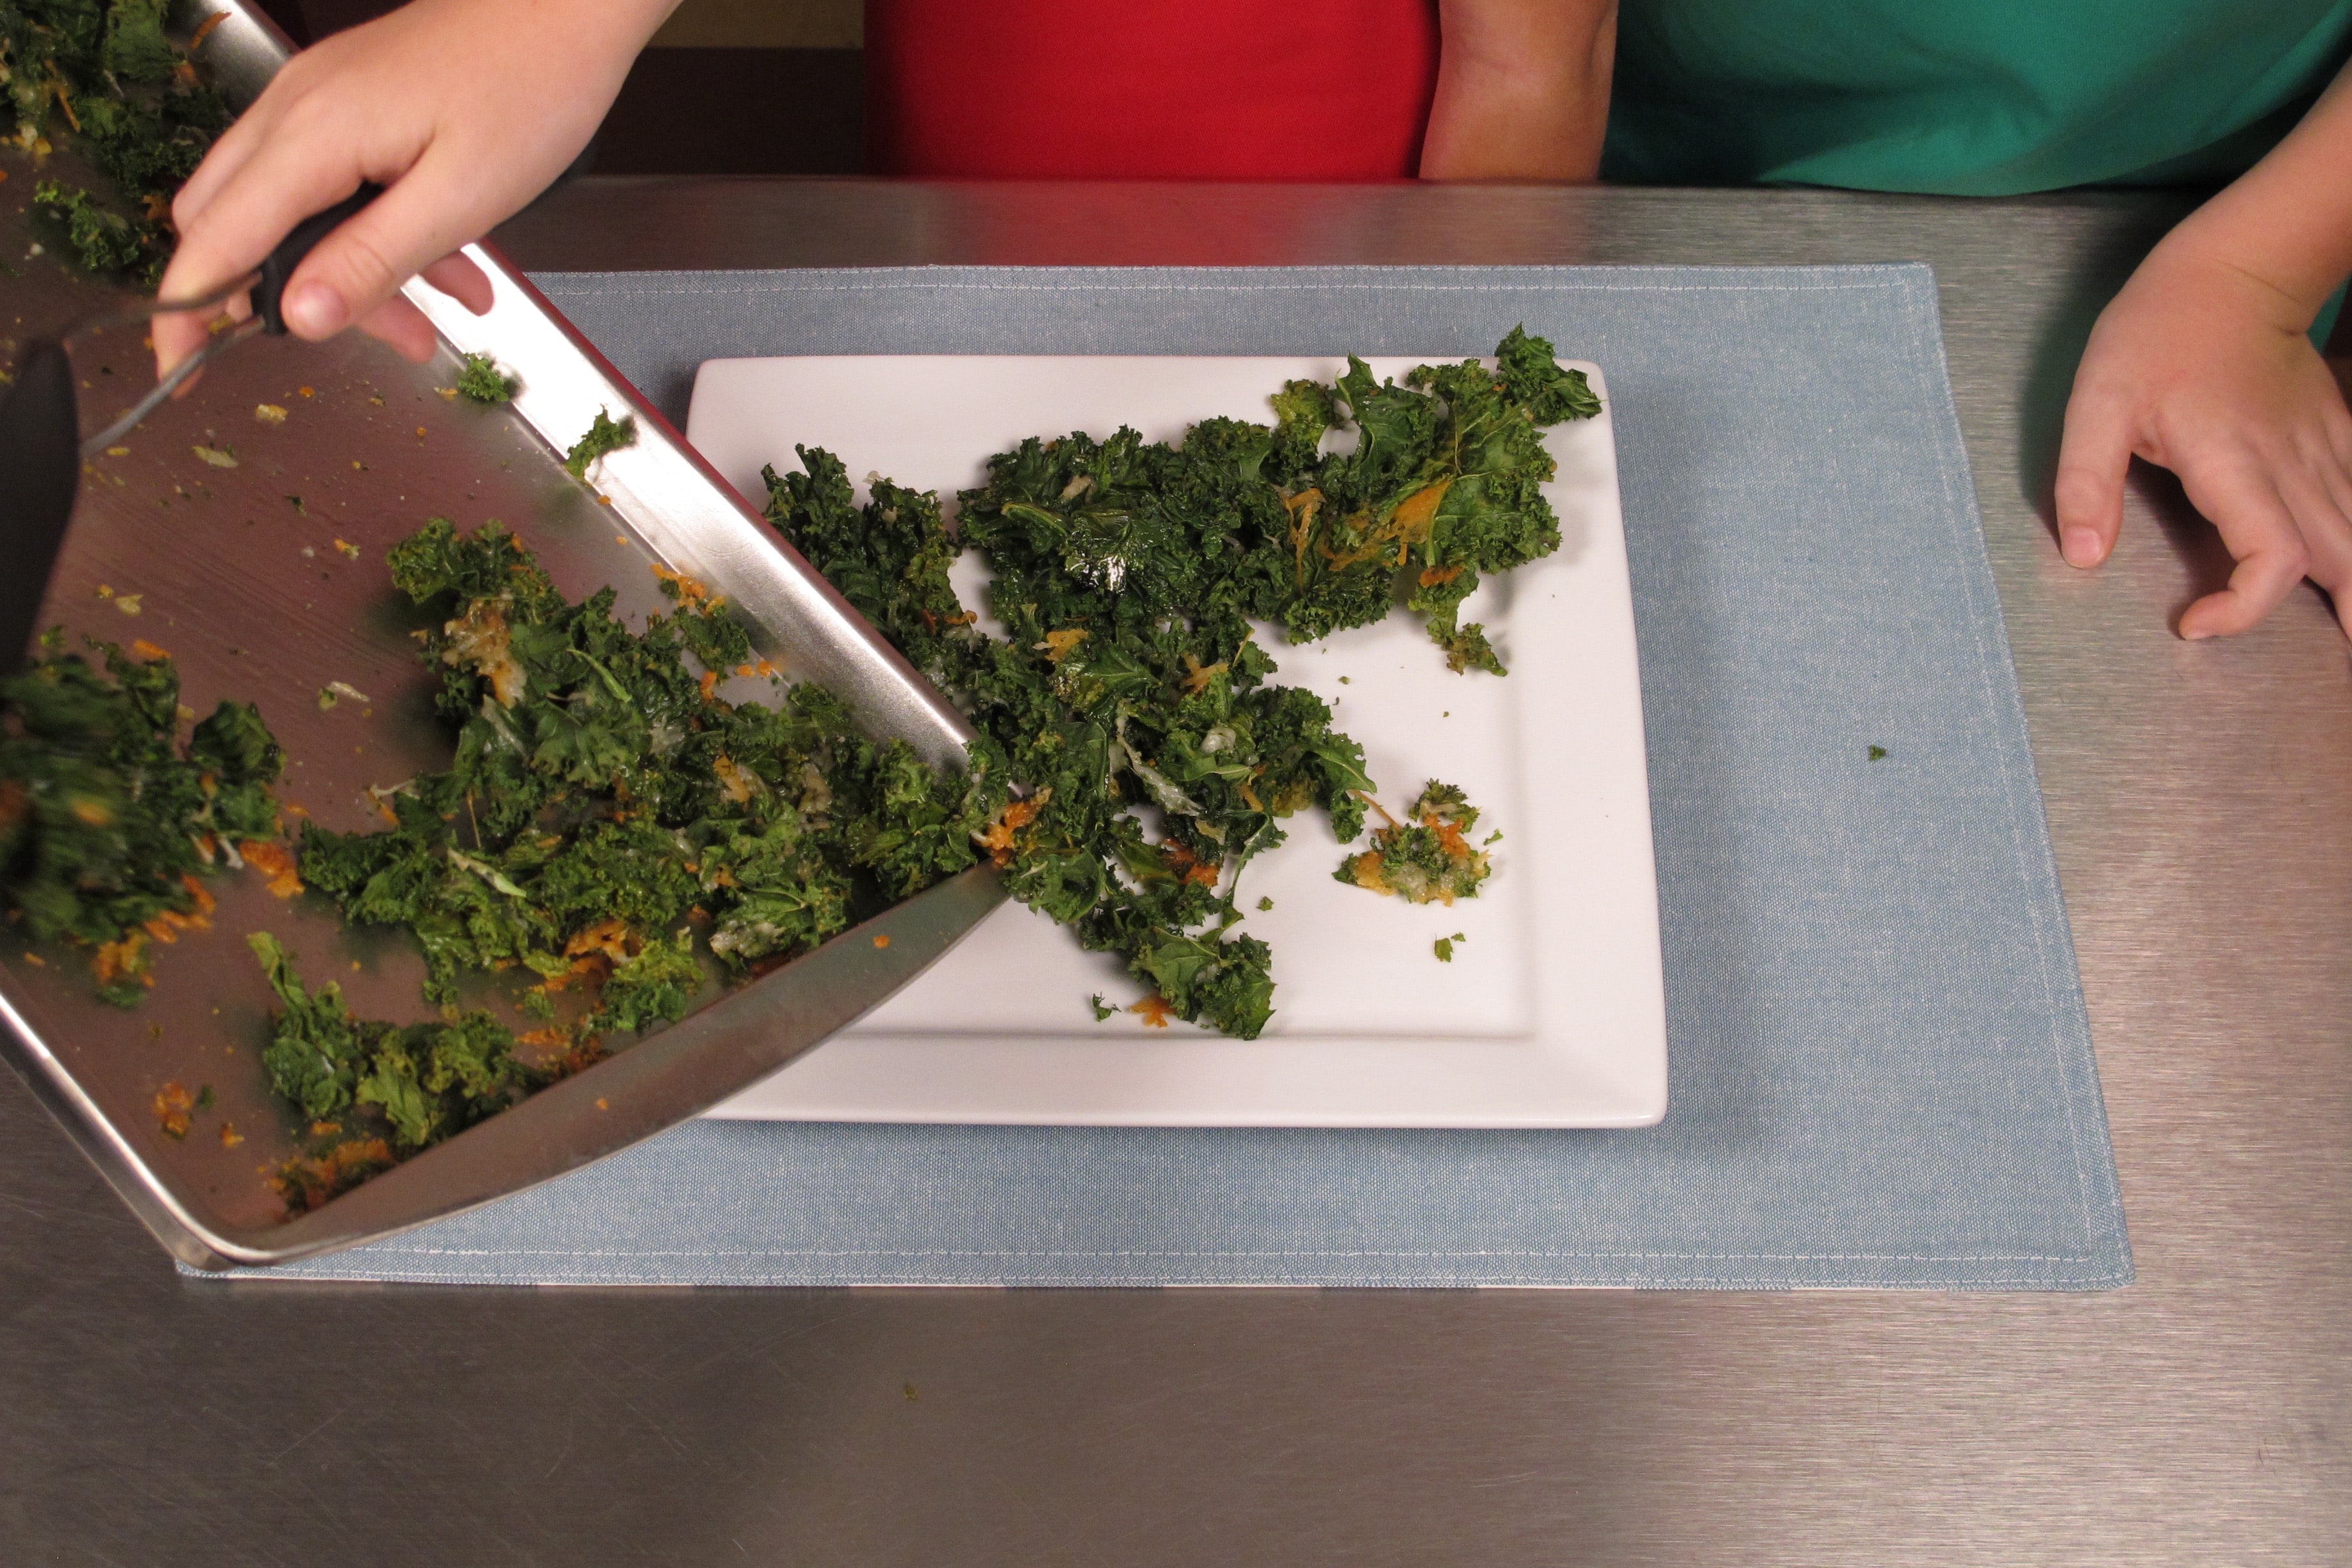 (continued) Bake at 400°F for 10–15 minutes or until kale is crisp and edges are brown but not burned.